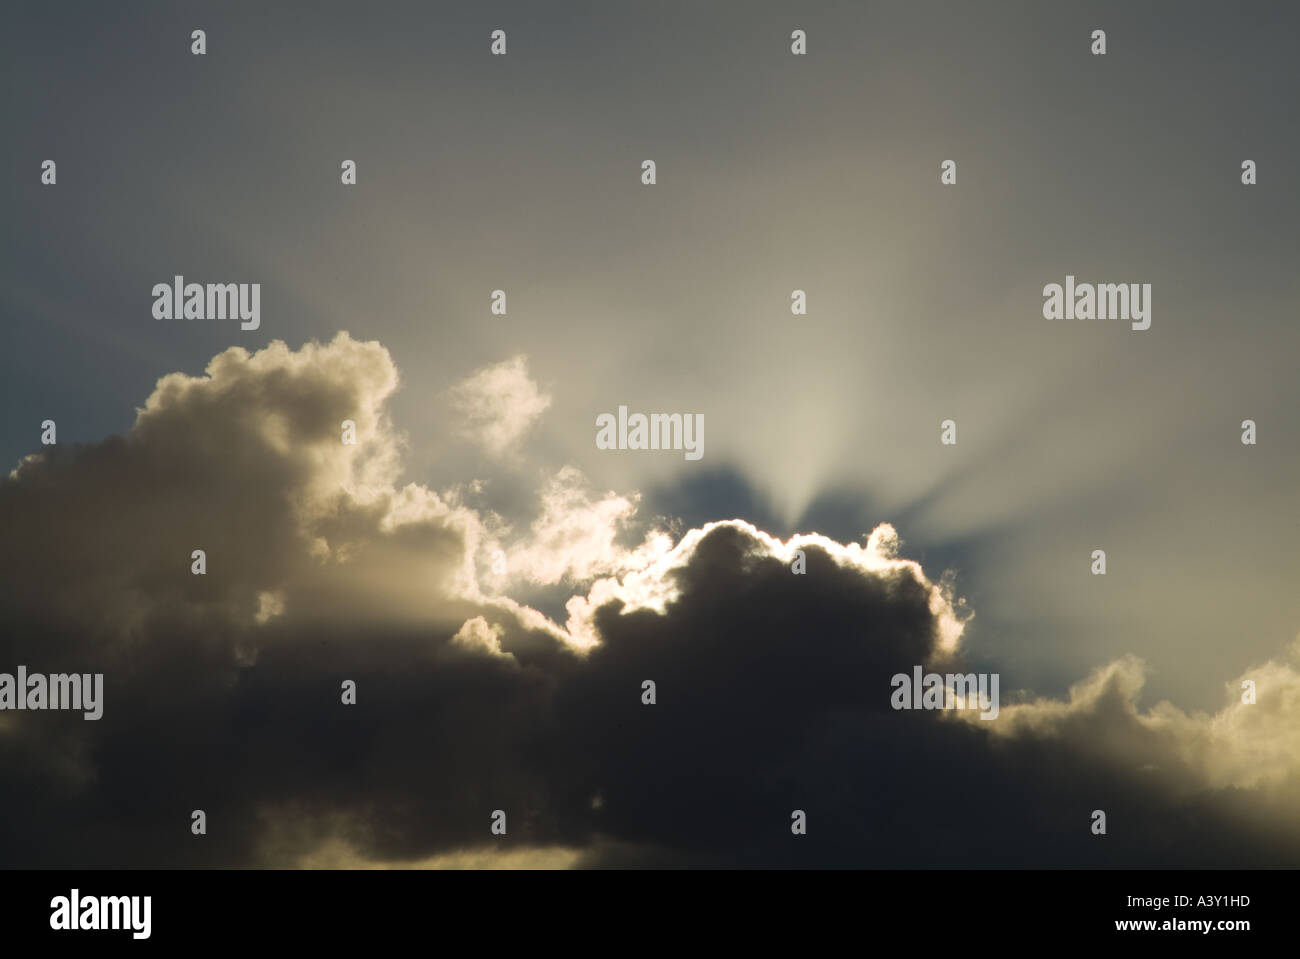 dh storm clouds CLOUDS BACKGROUND Black and grey sunlight from white sun stormy sky uk backlit cloud sunbeam moody rays silver lining Stock Photo